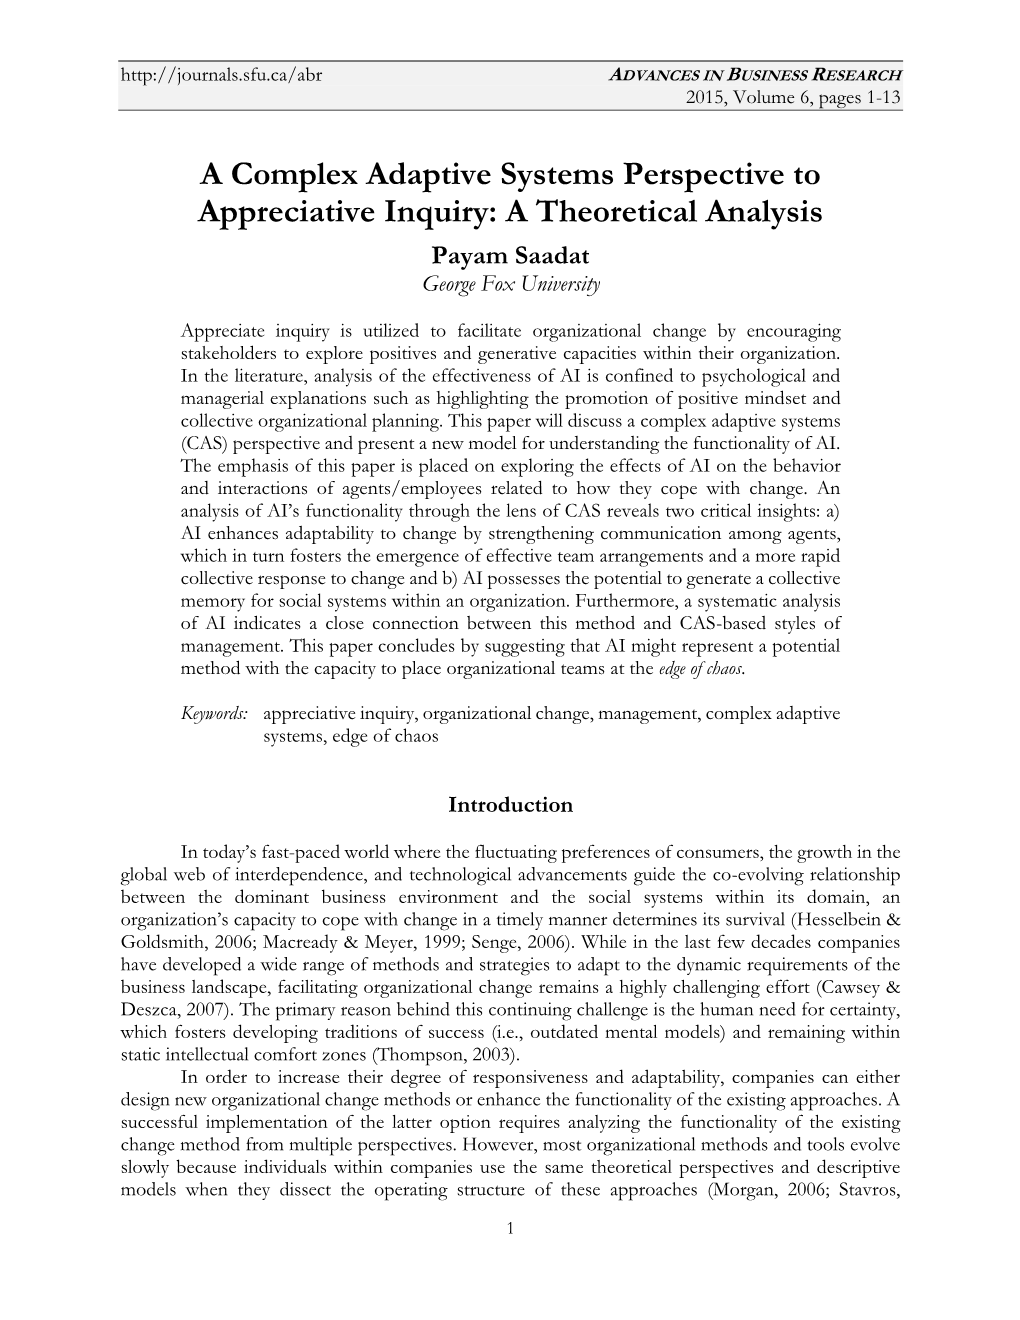 A Complex Adaptive Systems Perspective to Appreciative Inquiry: a Theoretical Analysis Payam Saadat George Fox University